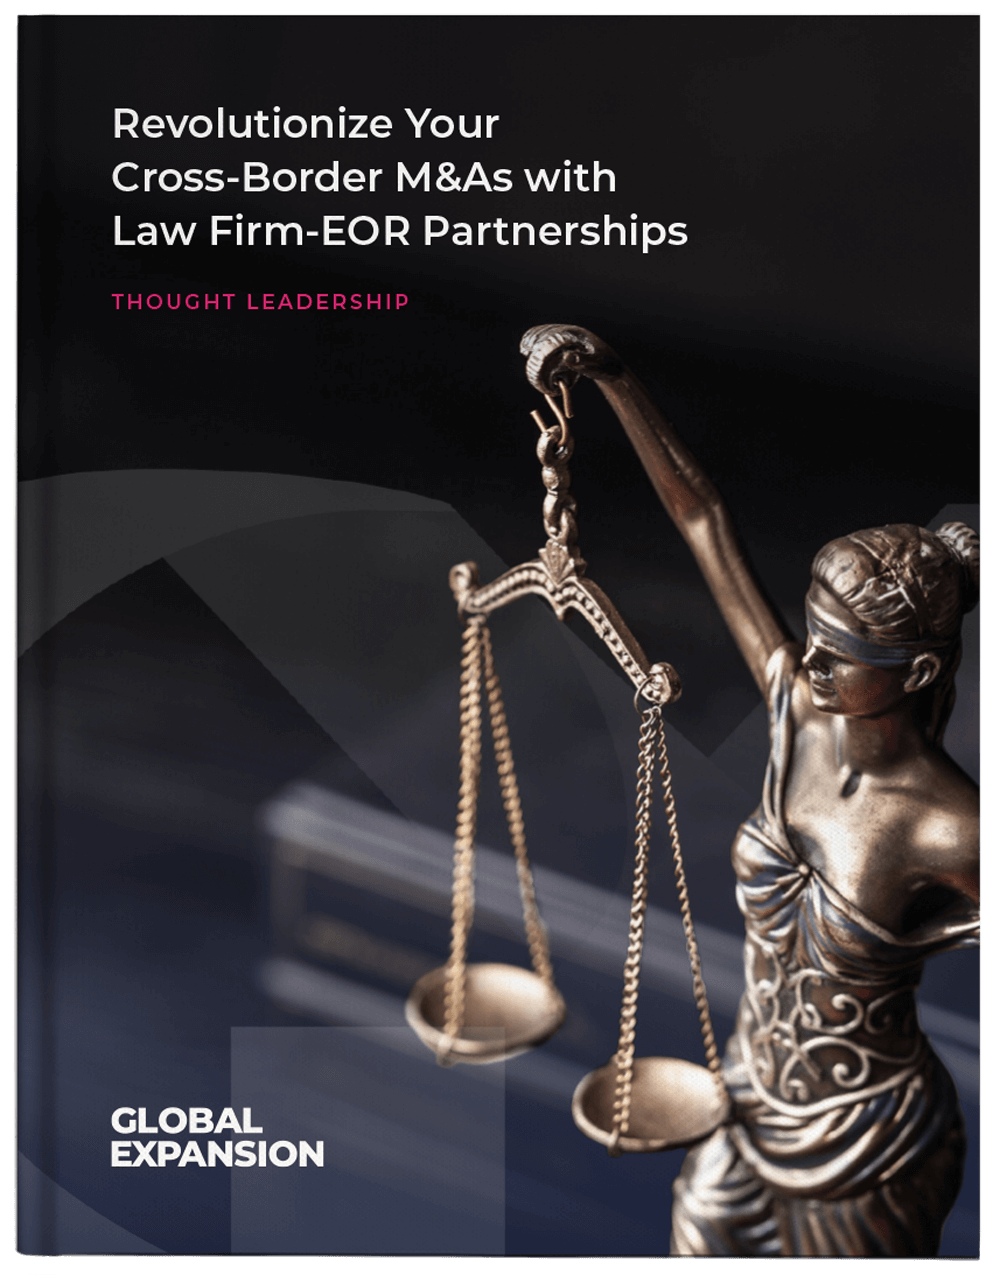 Revolutionize-Your-Cross-Border-M_As-with-Law-Firm-EOR-Partnerships-Cover